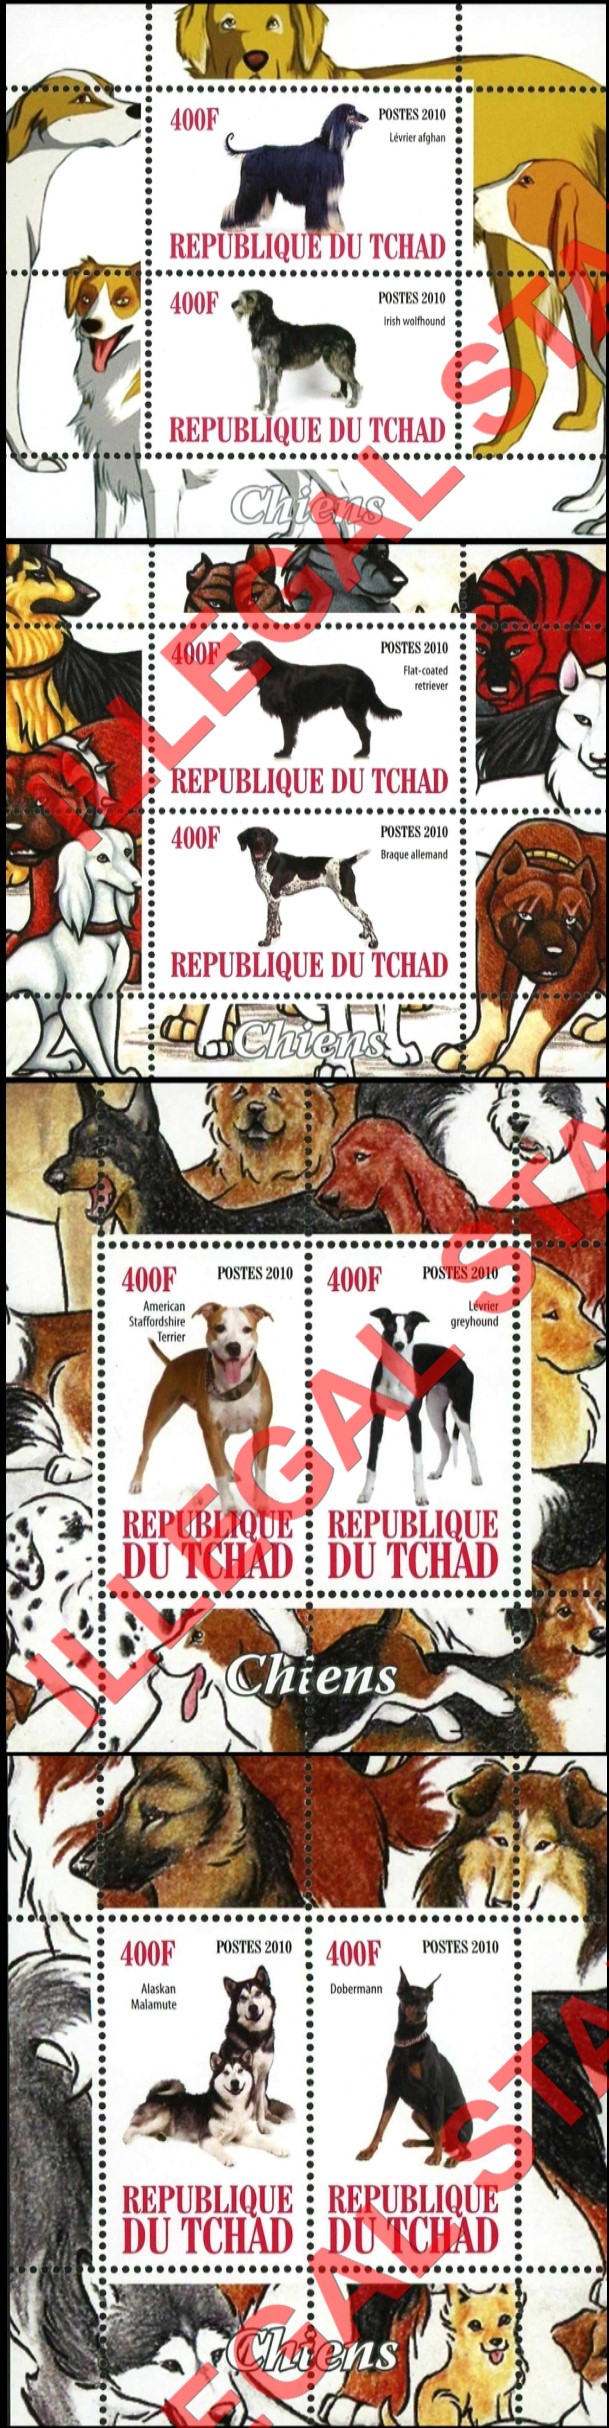 Chad 2010 Dogs Illegal Stamps in Souvenir Sheets of 2